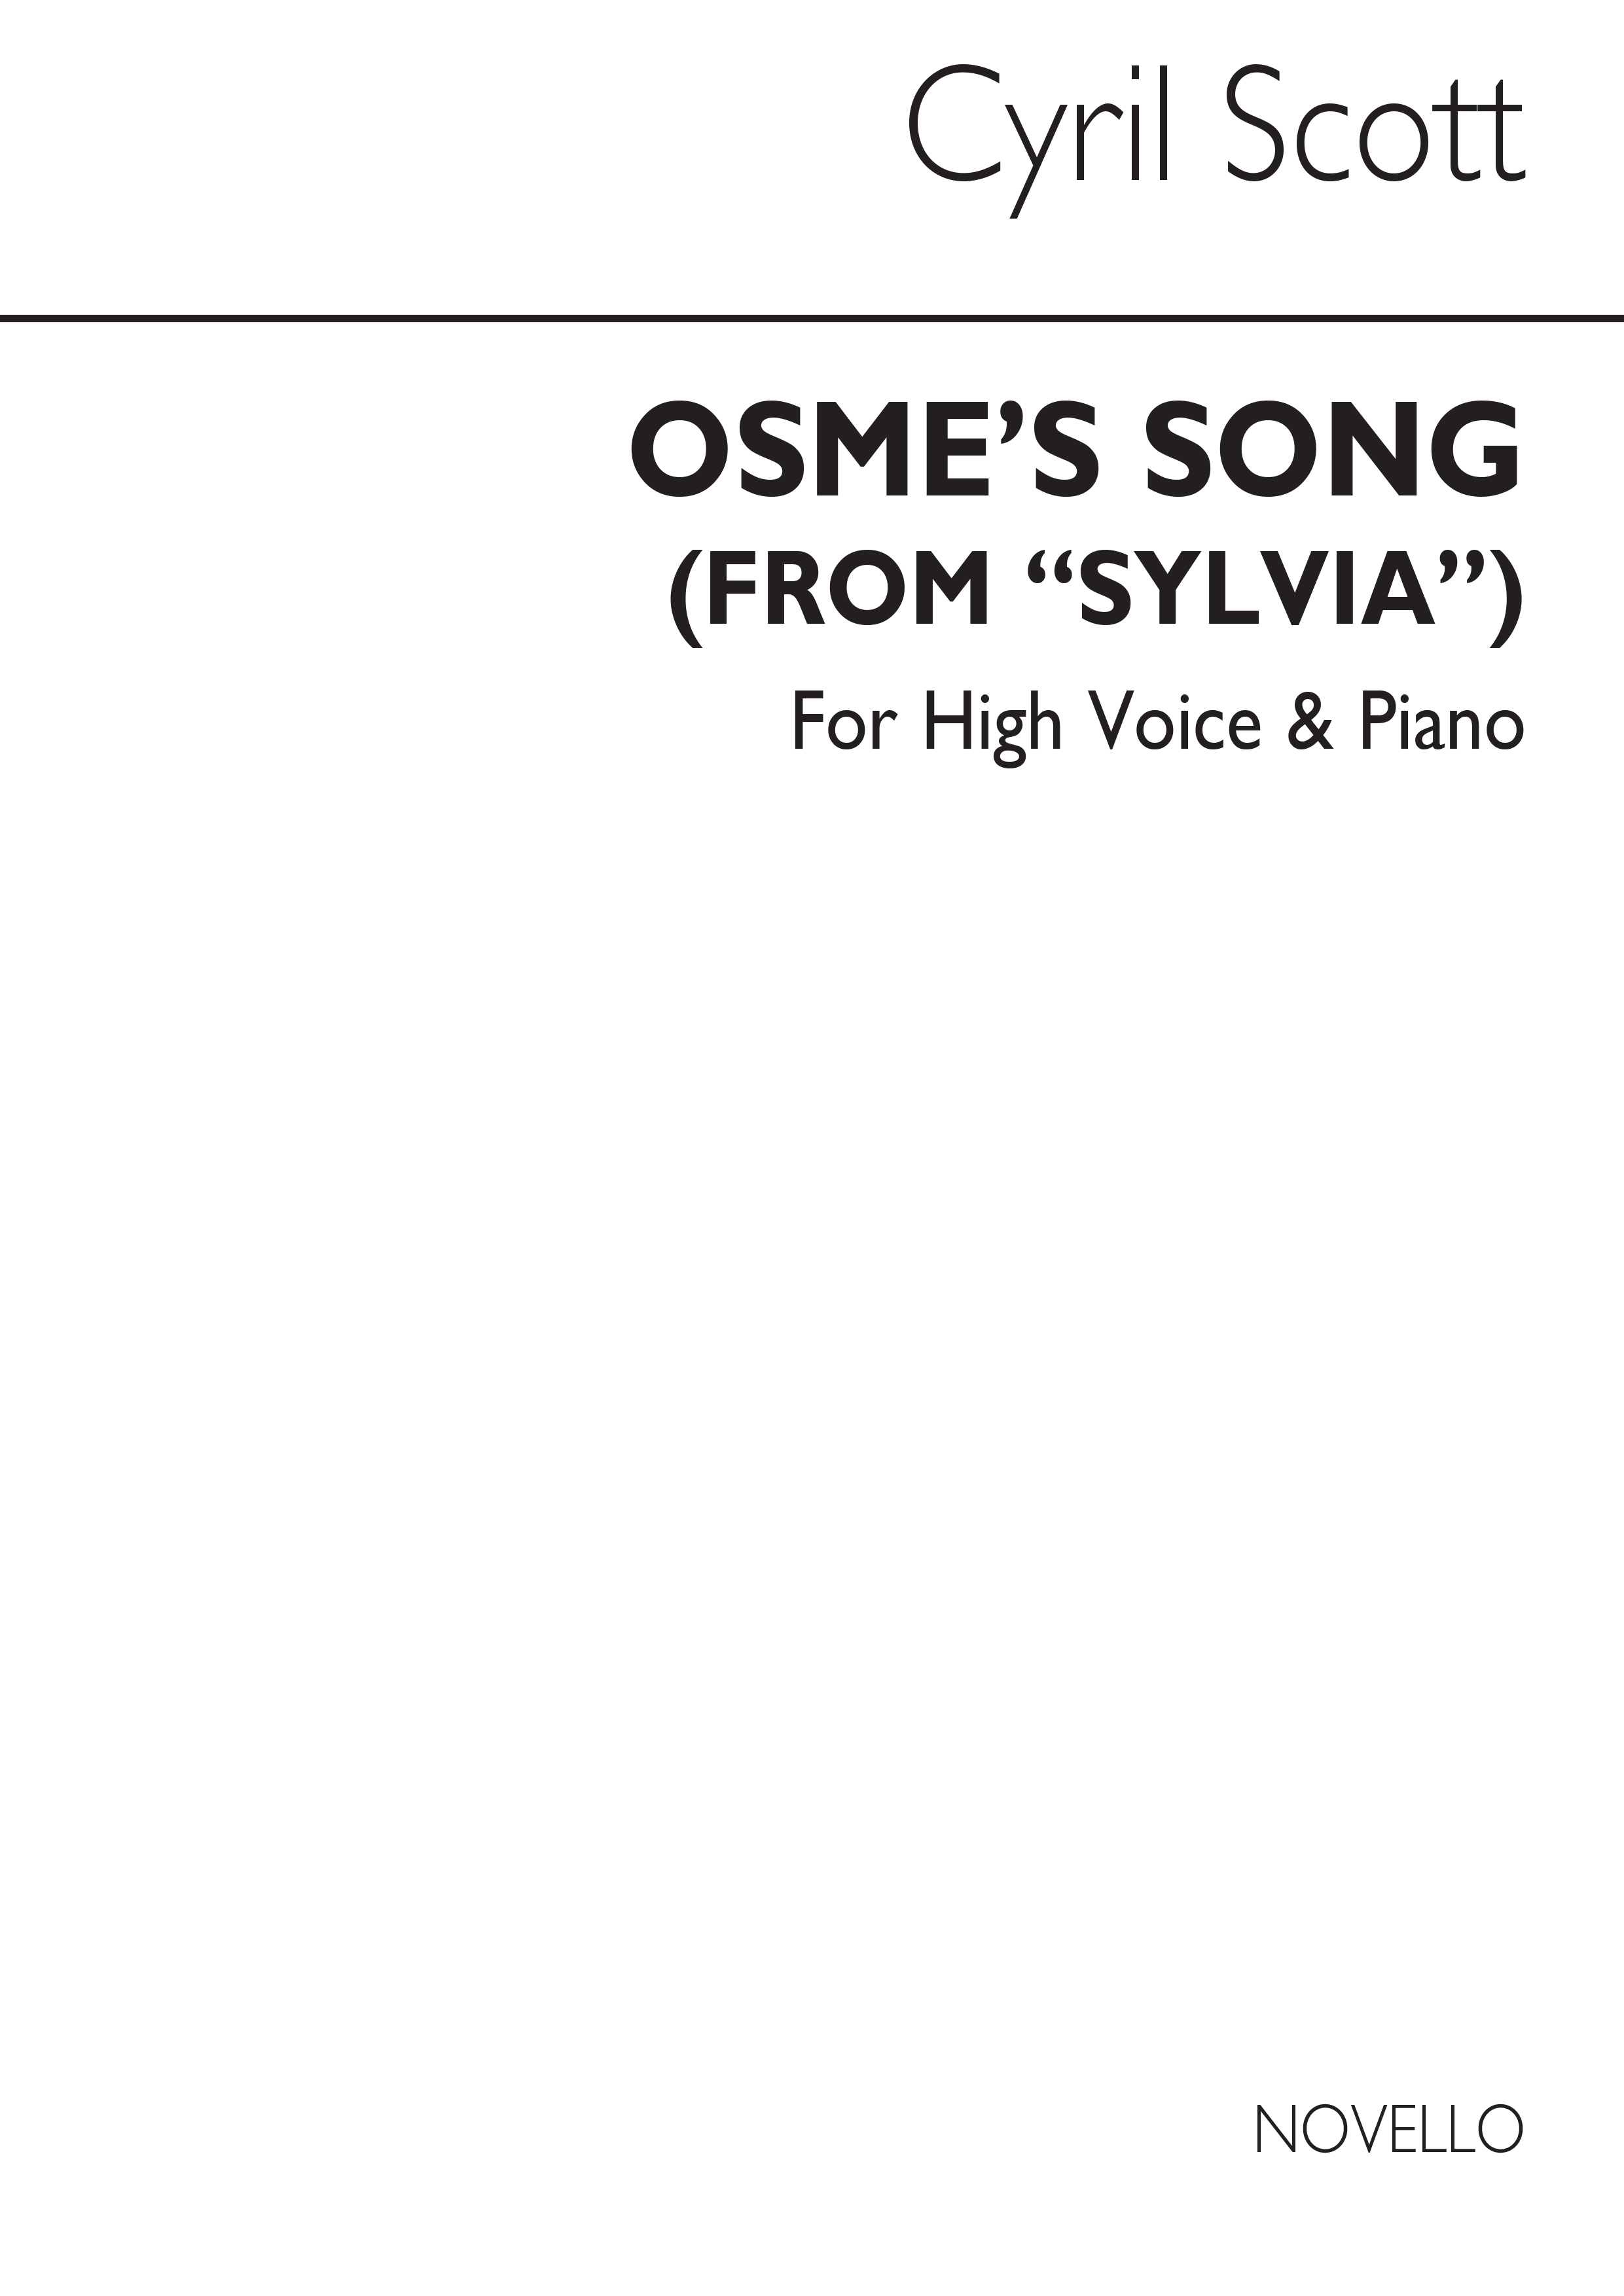 Cyril Scott: Osme's Song (From Sylvia) Op68 No.2: High Voice: Vocal Work